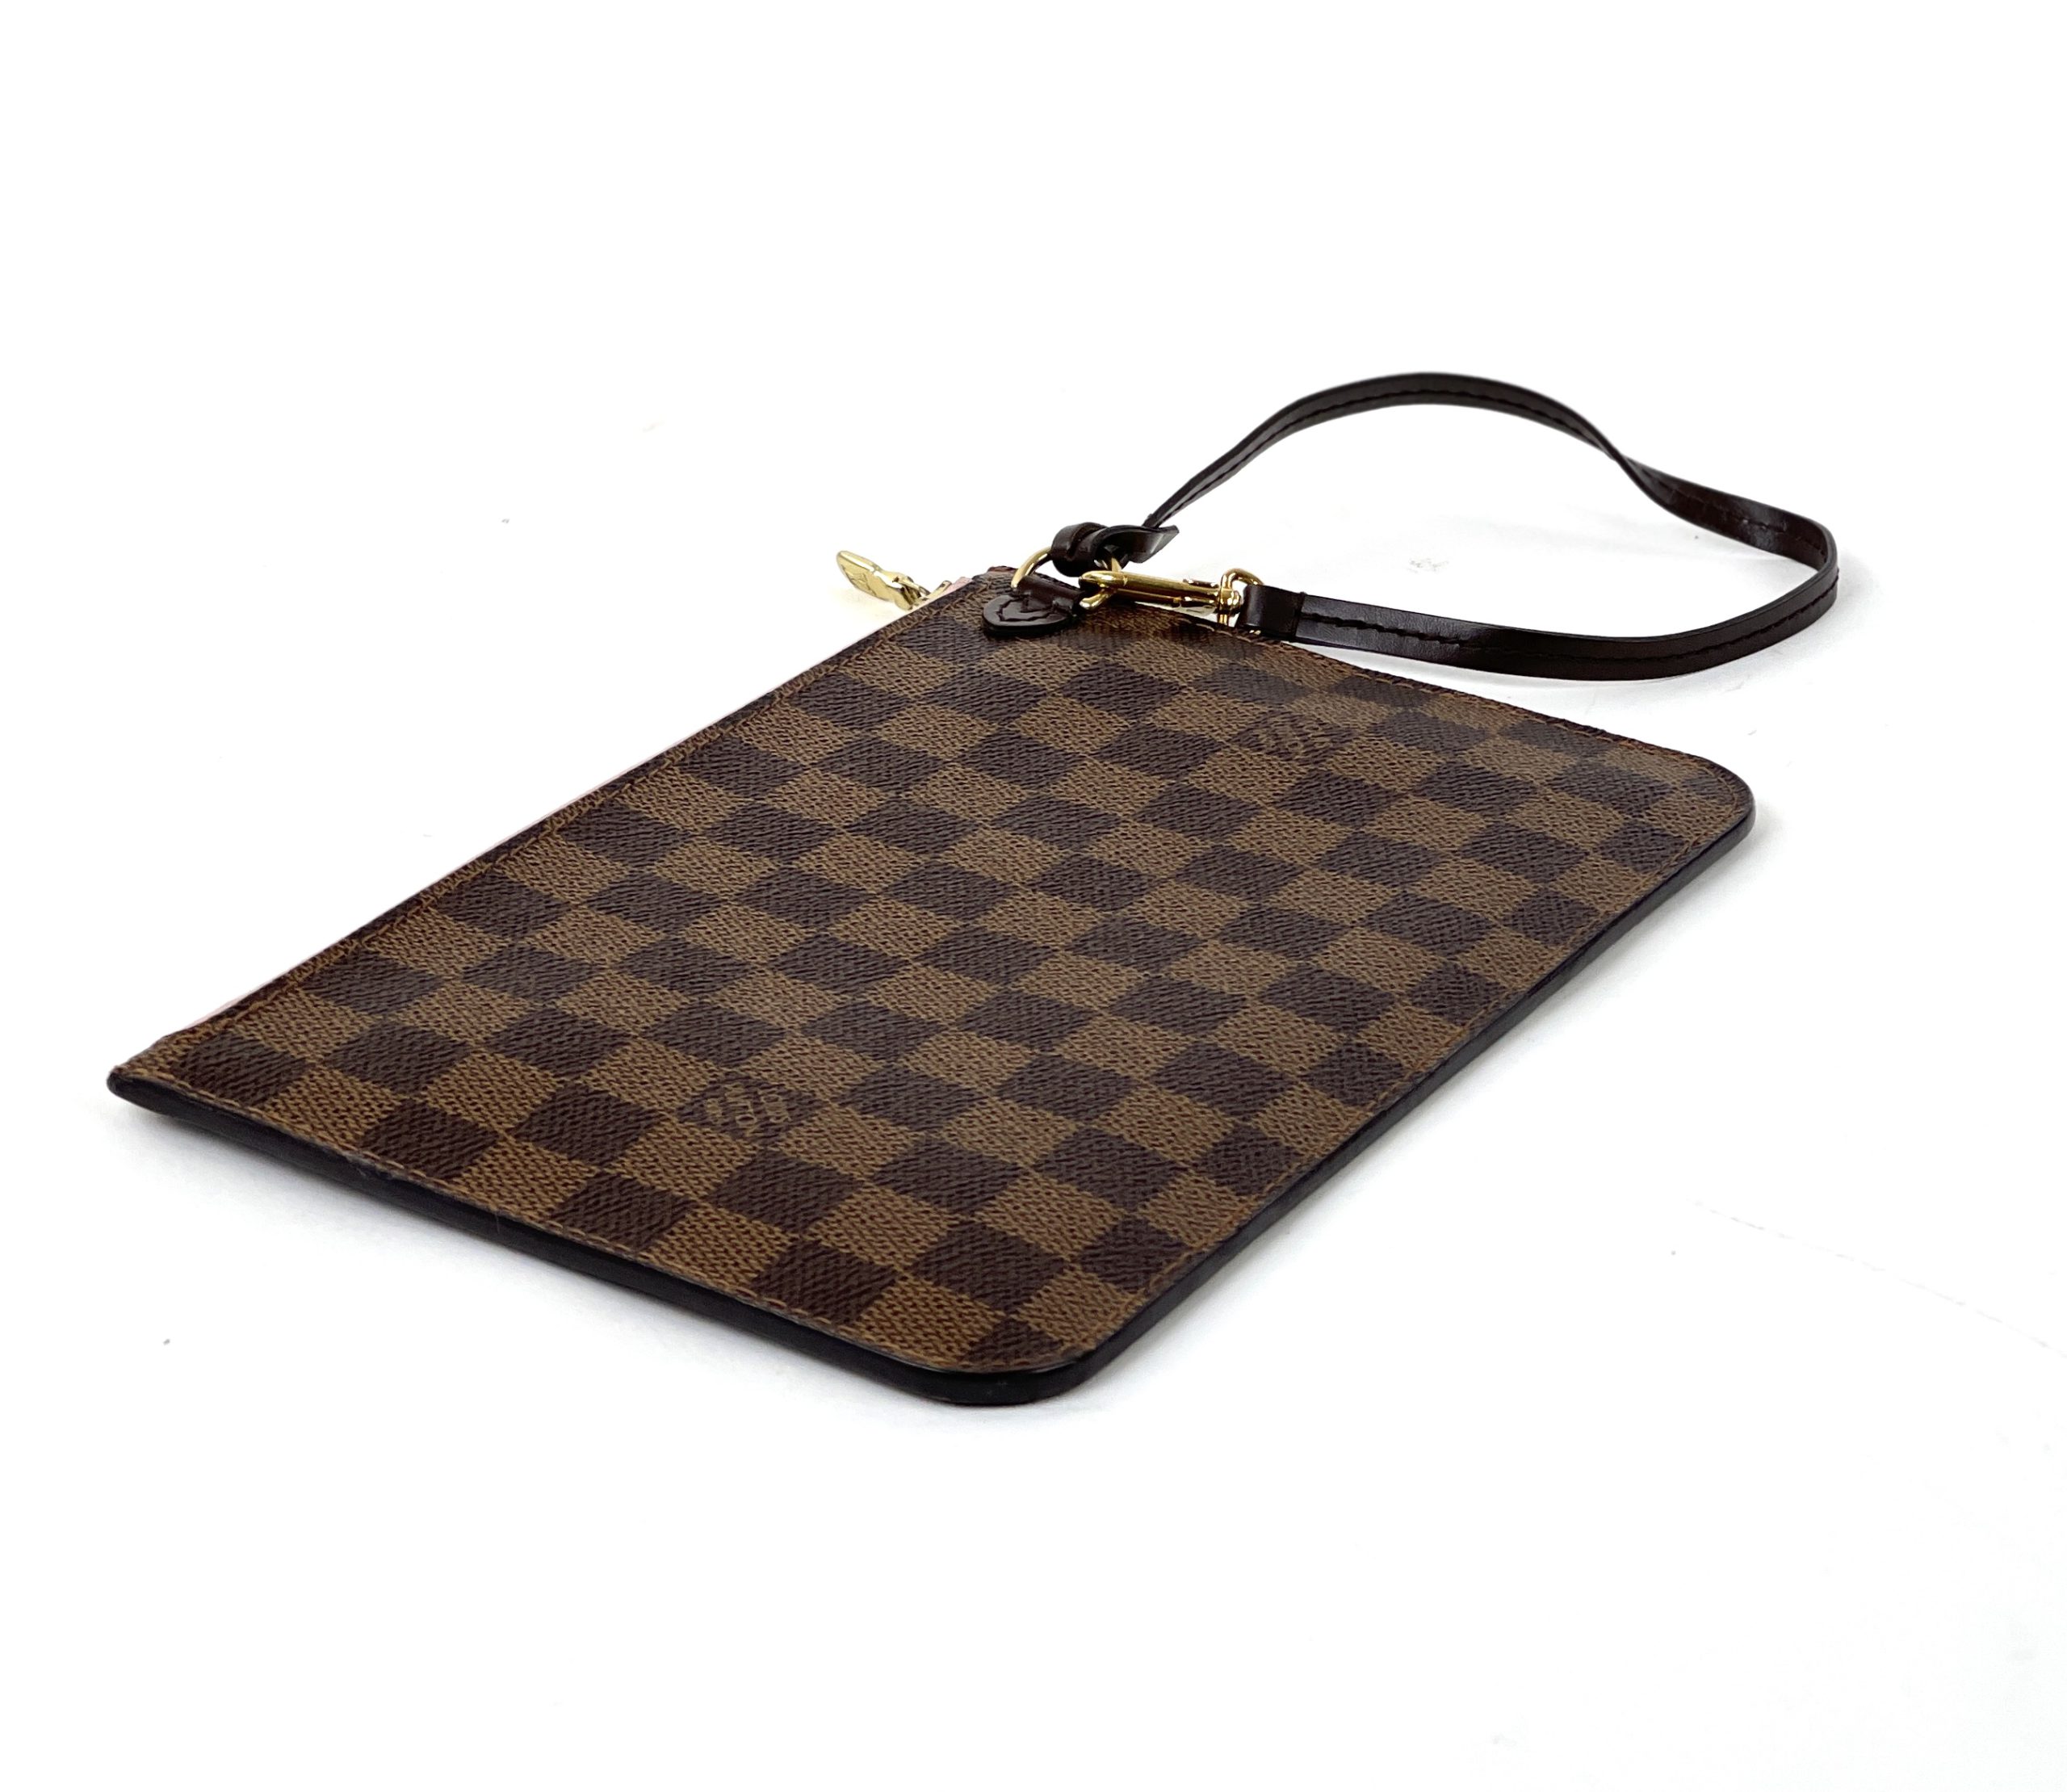 Louis Vuitton Tahitienne Neverfull - A World Of Goods For You, LLC